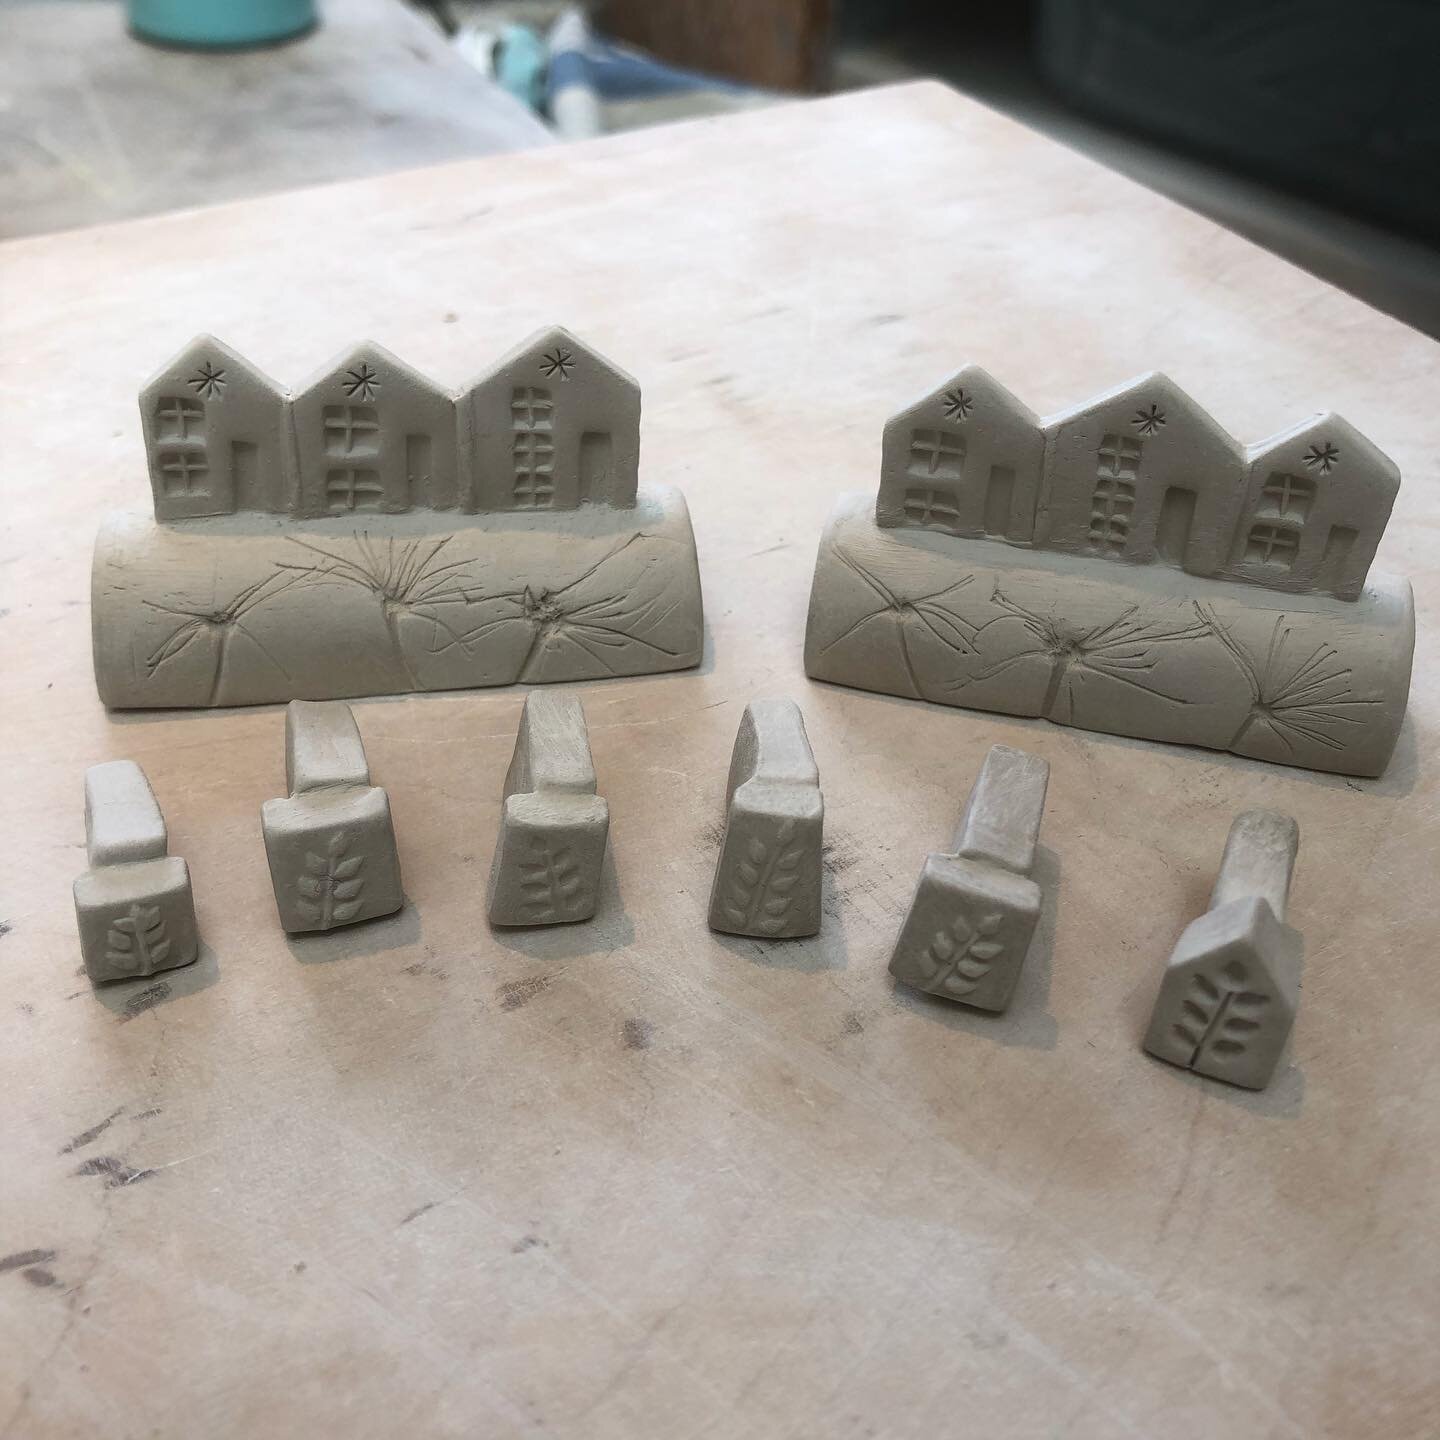 Tiny stamps and little rows of houses . I love making my own stamps and the anticipation of how they are going to look ! Ps (Also took at least fifteen photos of these and the first one was the best anyone else do this?! 🤣)